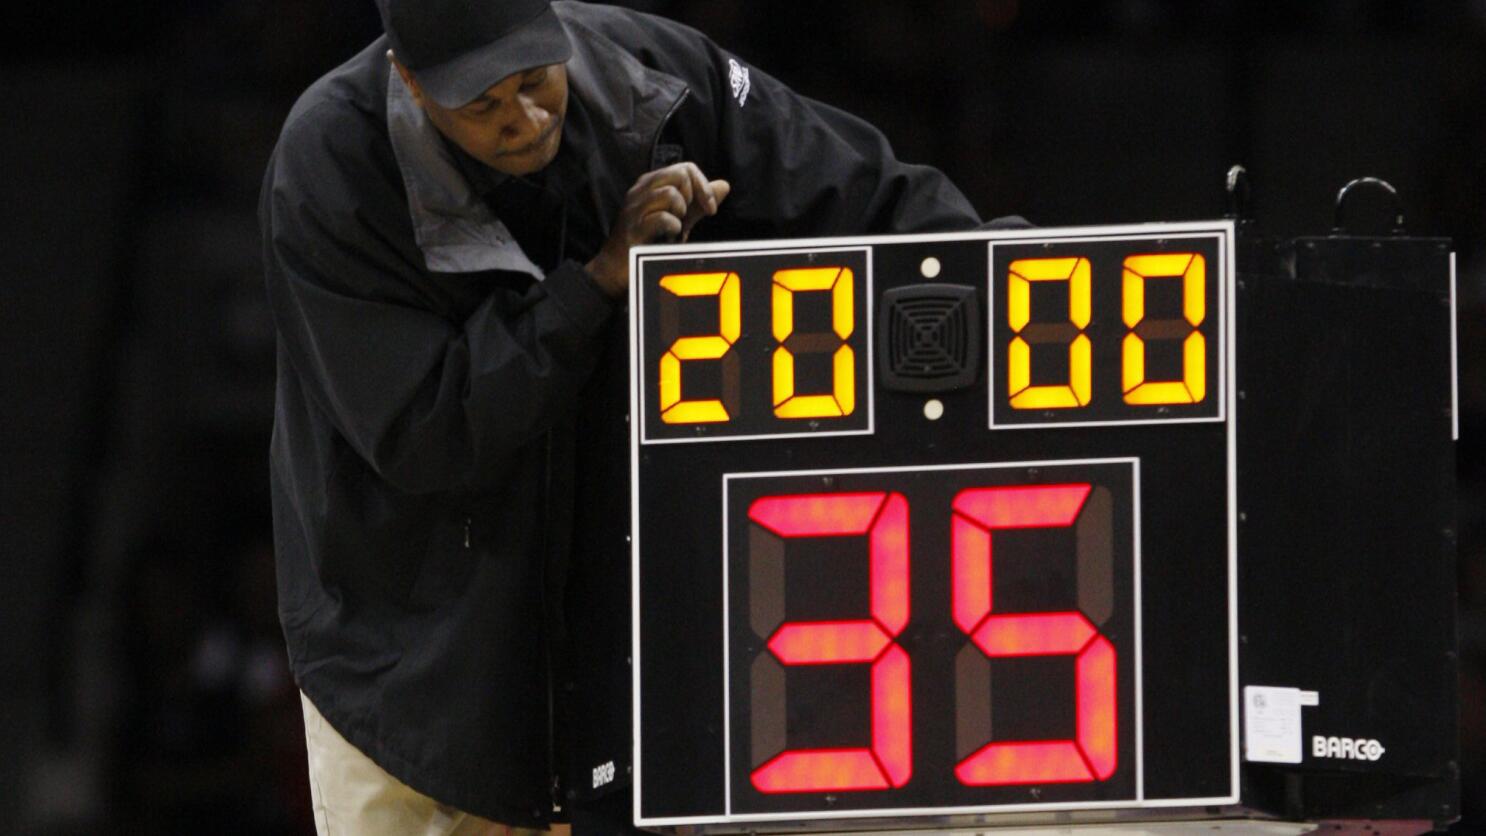 NCAA rules panel approves keeping clock running on college